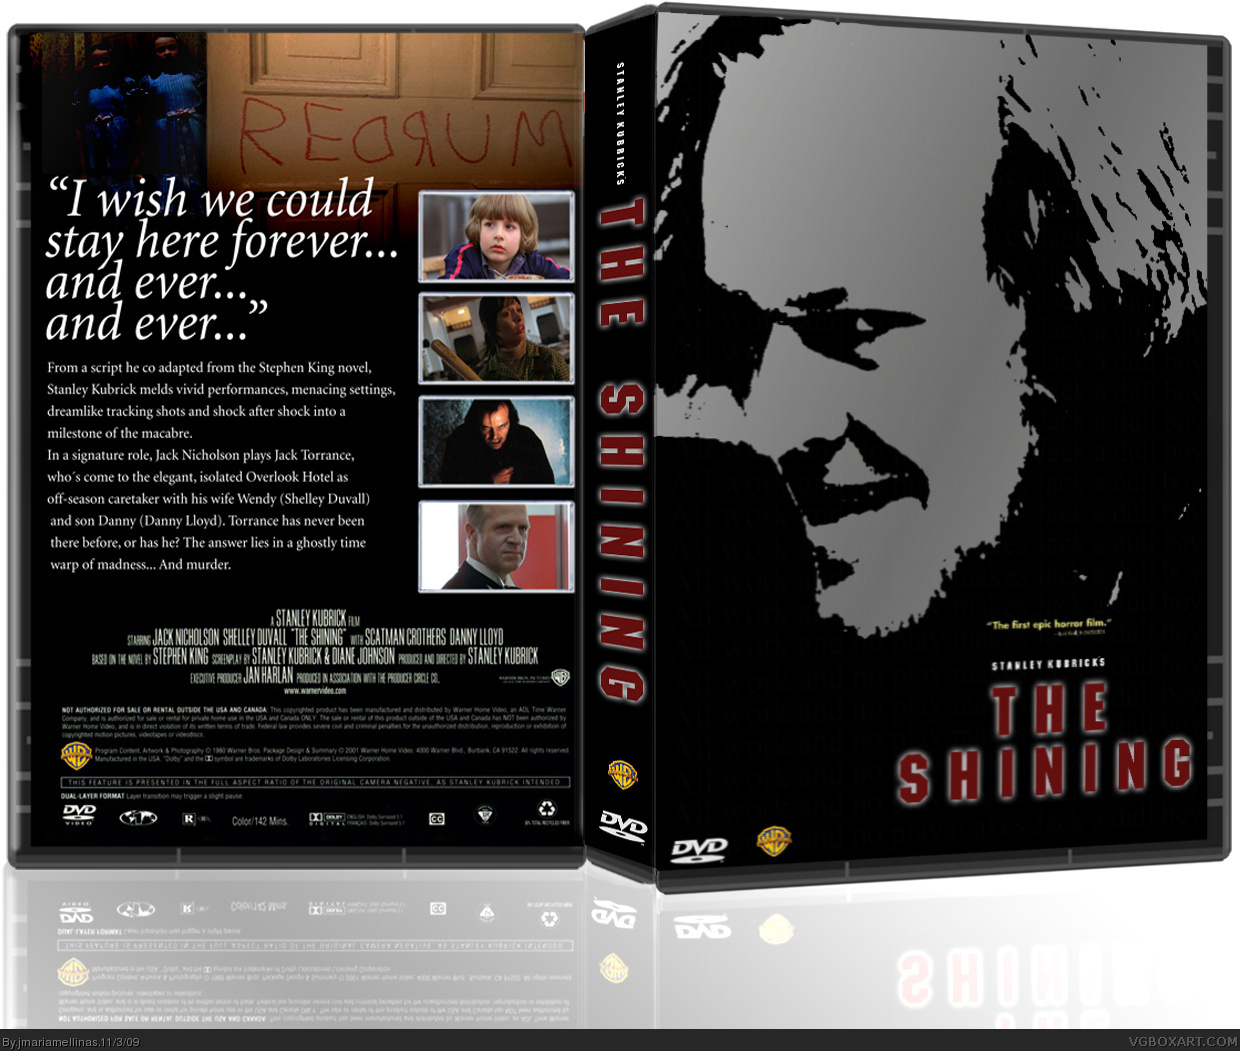 The Shining box cover